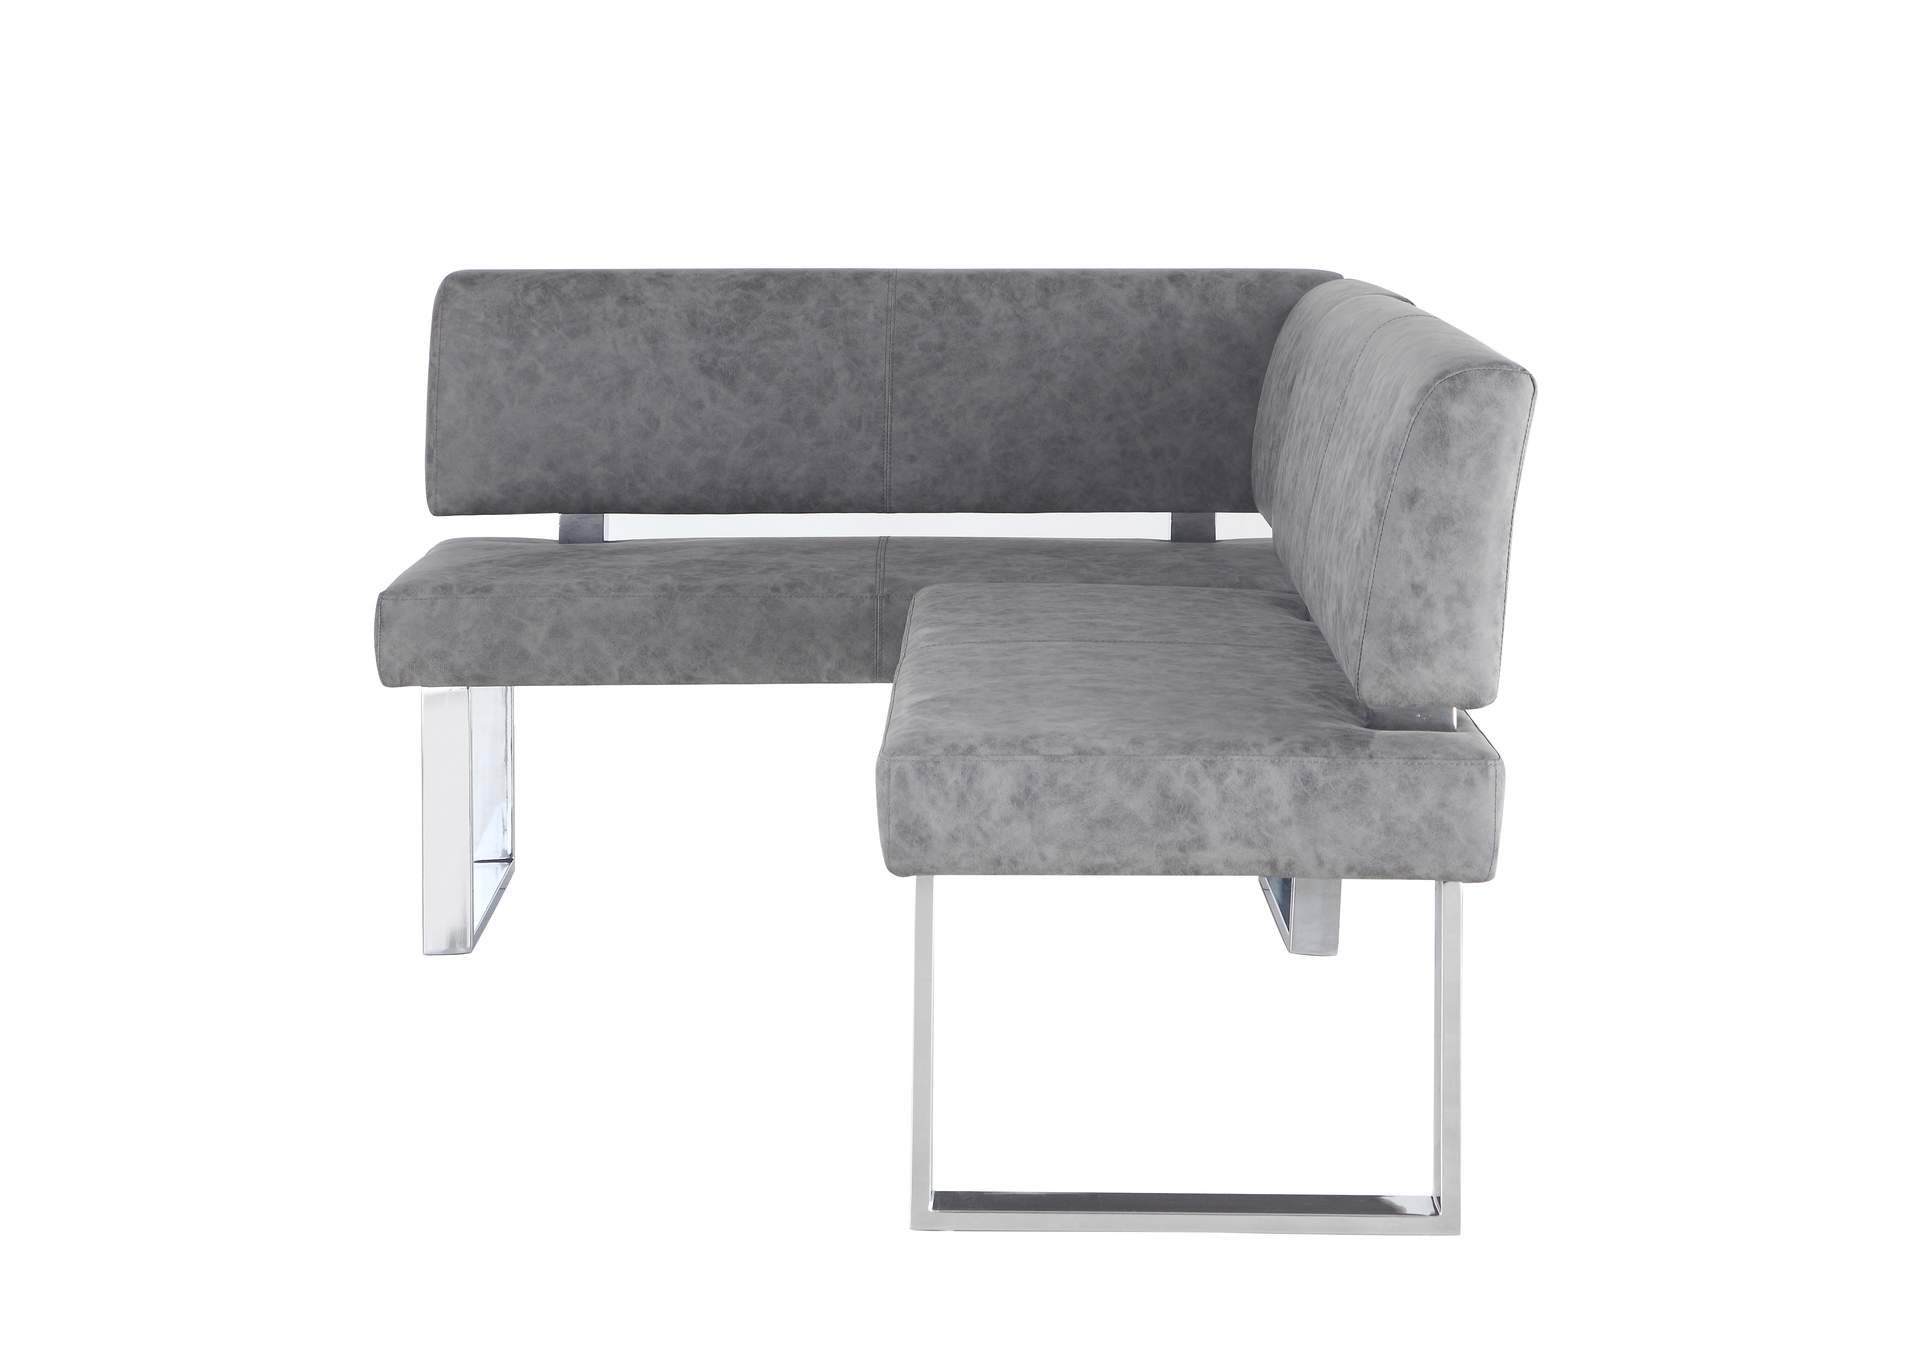 Genevieve Polished SS Modern Gray Reversible Upholstered Nook,Chintaly Imports